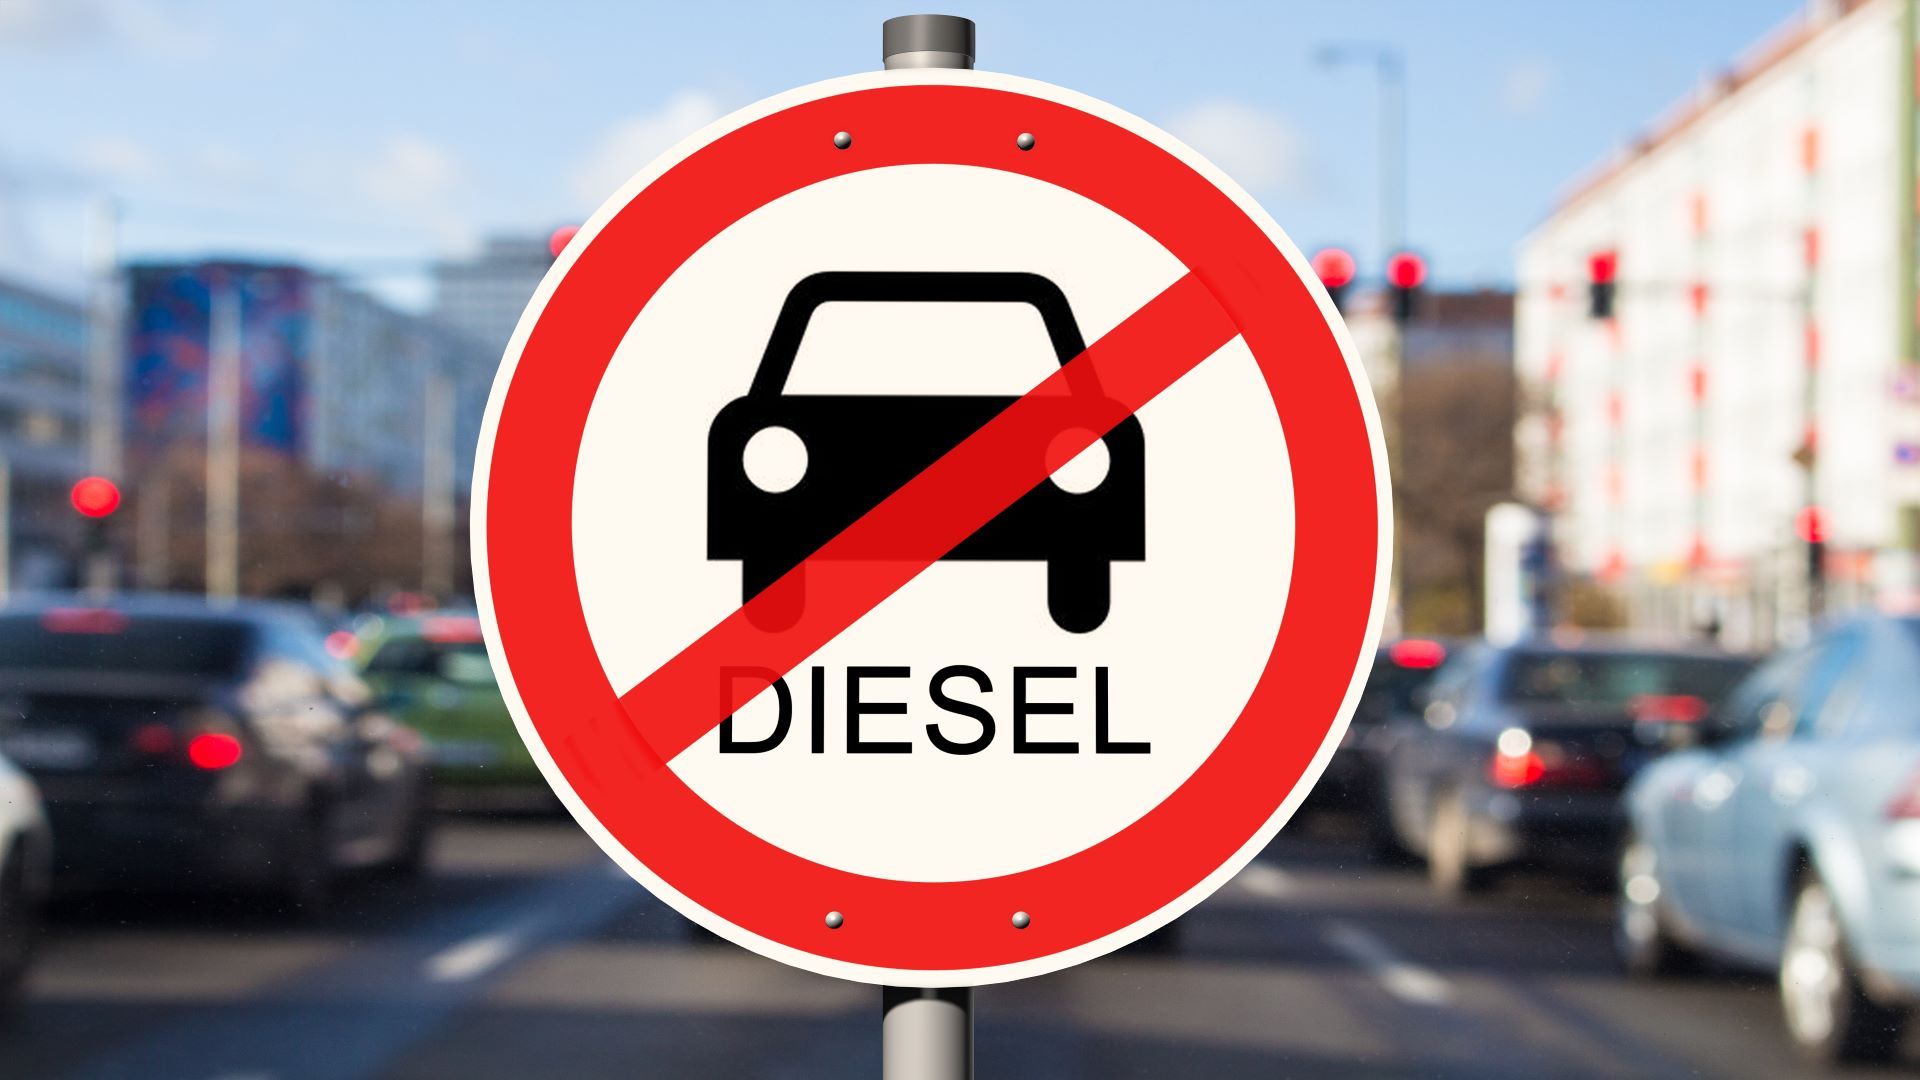 Under S&D leadership, European Parliament puts a ban on petrol and diesel-fuelled  cars and vans by 2035 | Socialists & Democrats